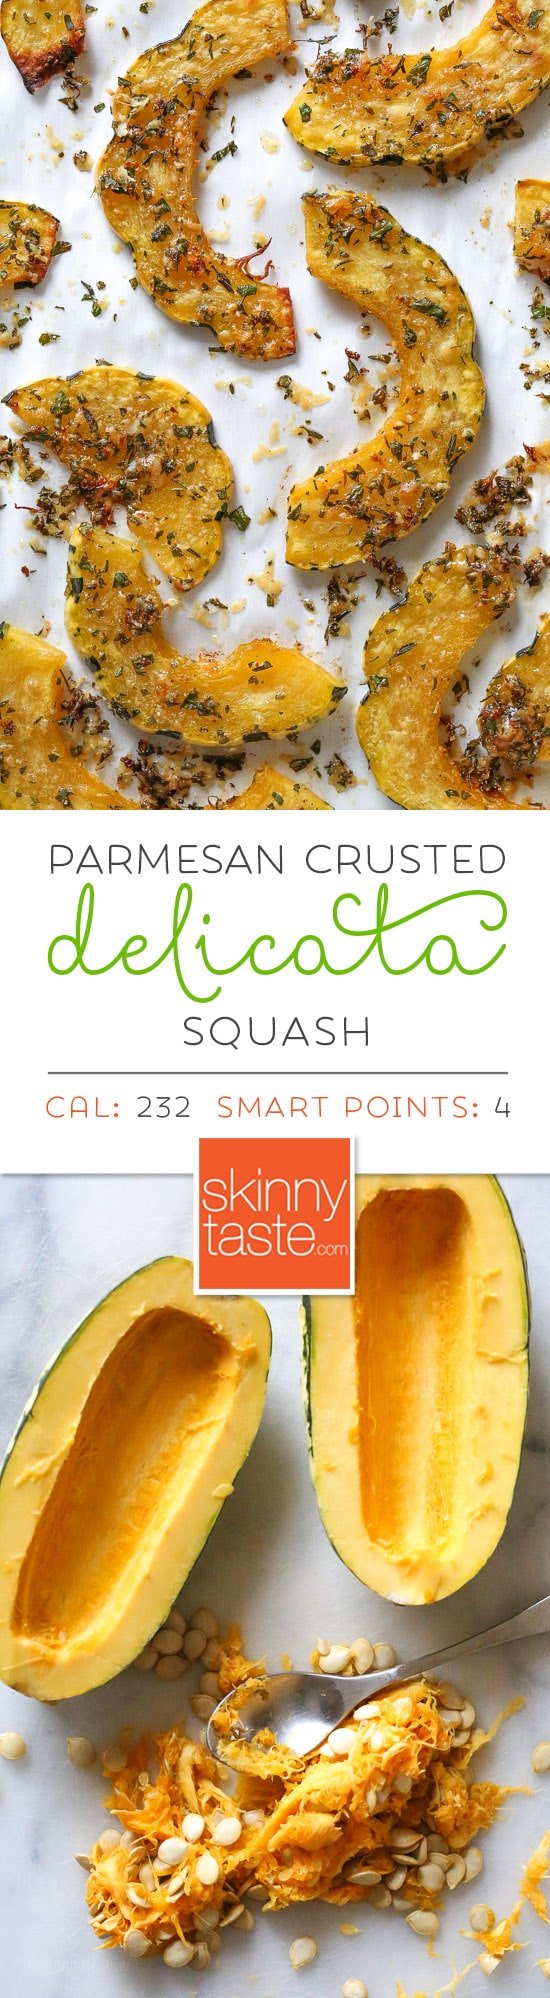 Roasted Delicata squash topped with a Parmesan-herb crust, I like to leave it in the oven until the edges are crisp, golden and delicious! Acorn squash can be used in place of Delicata.